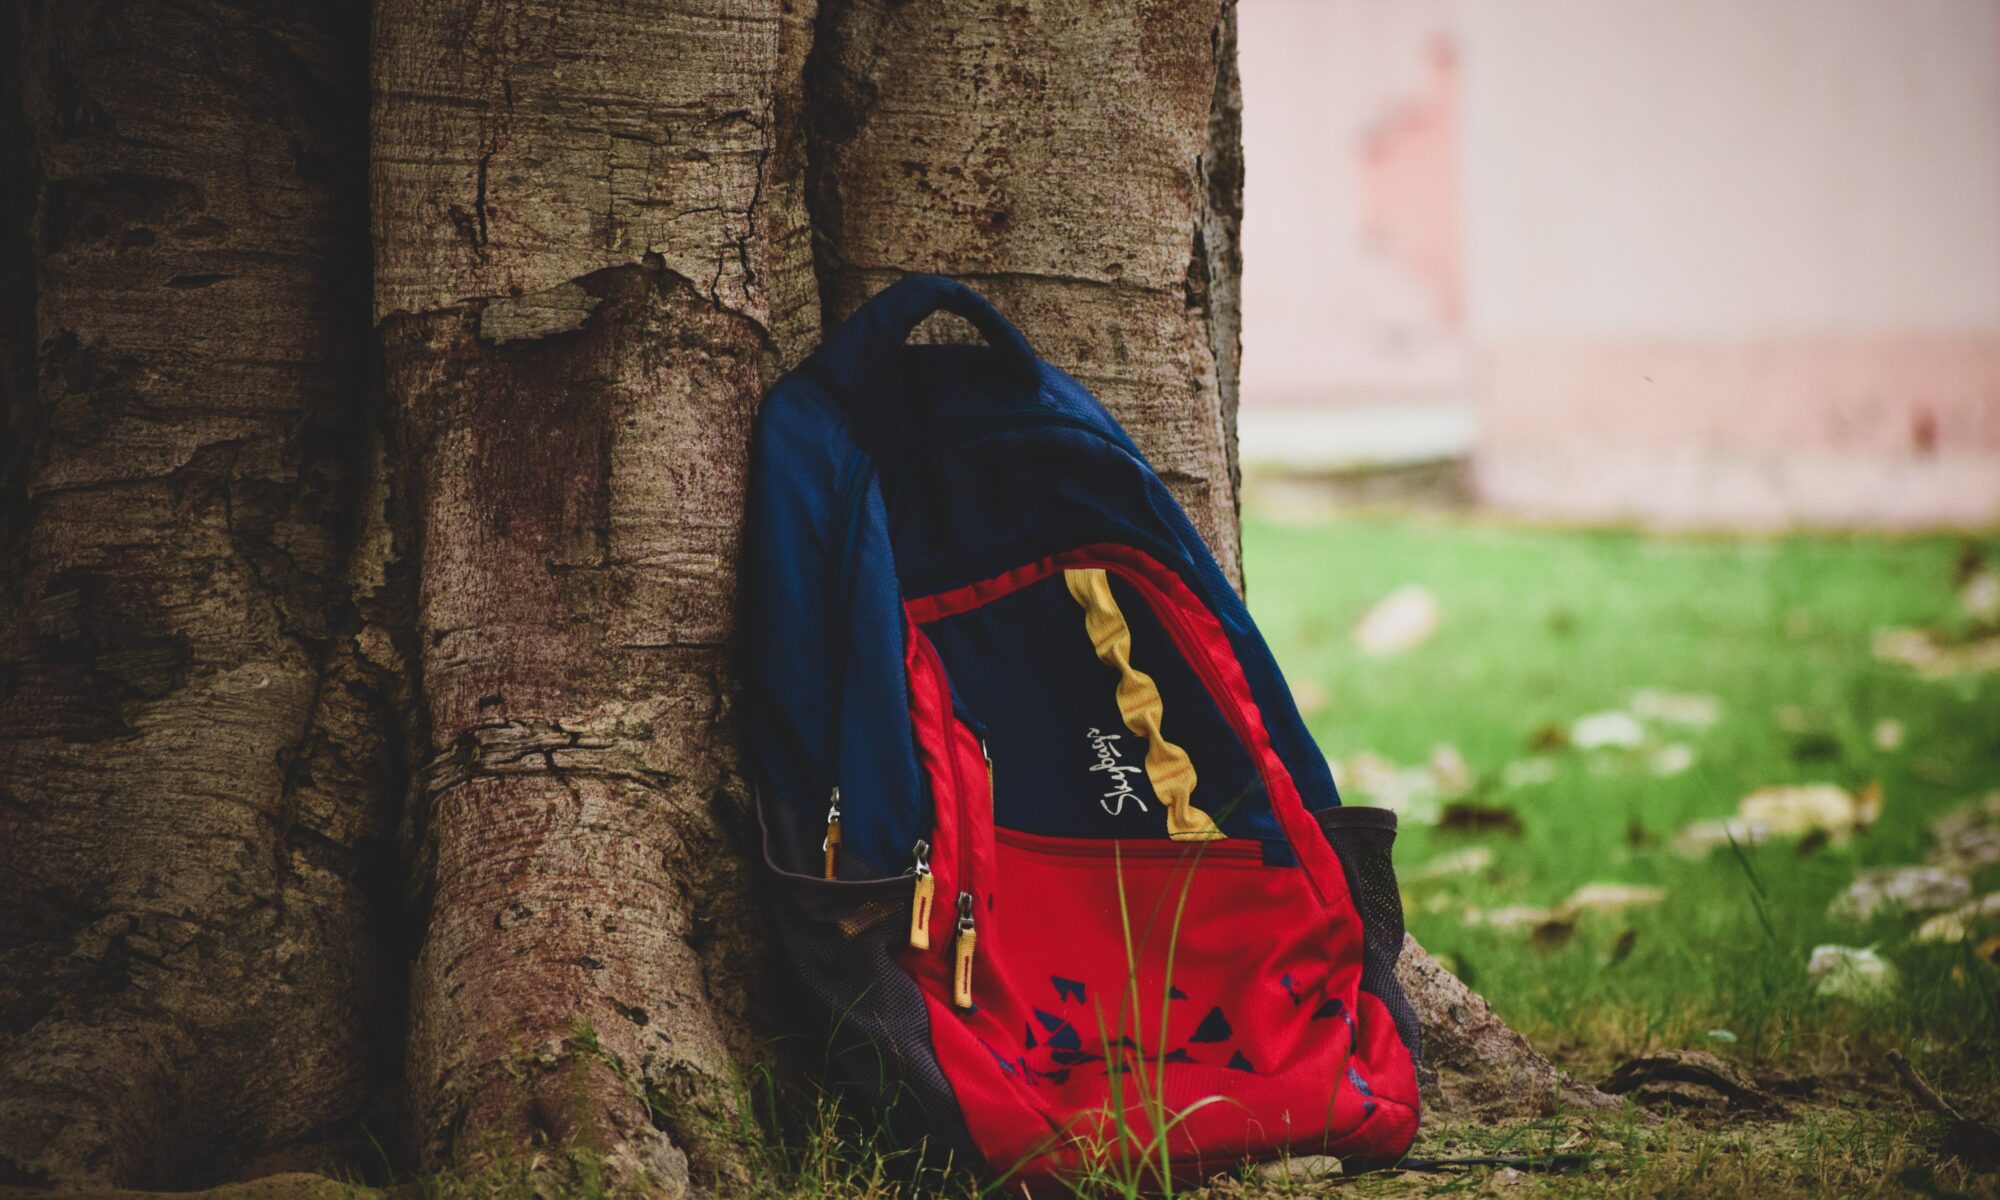 backpack leaning against a tree on grass